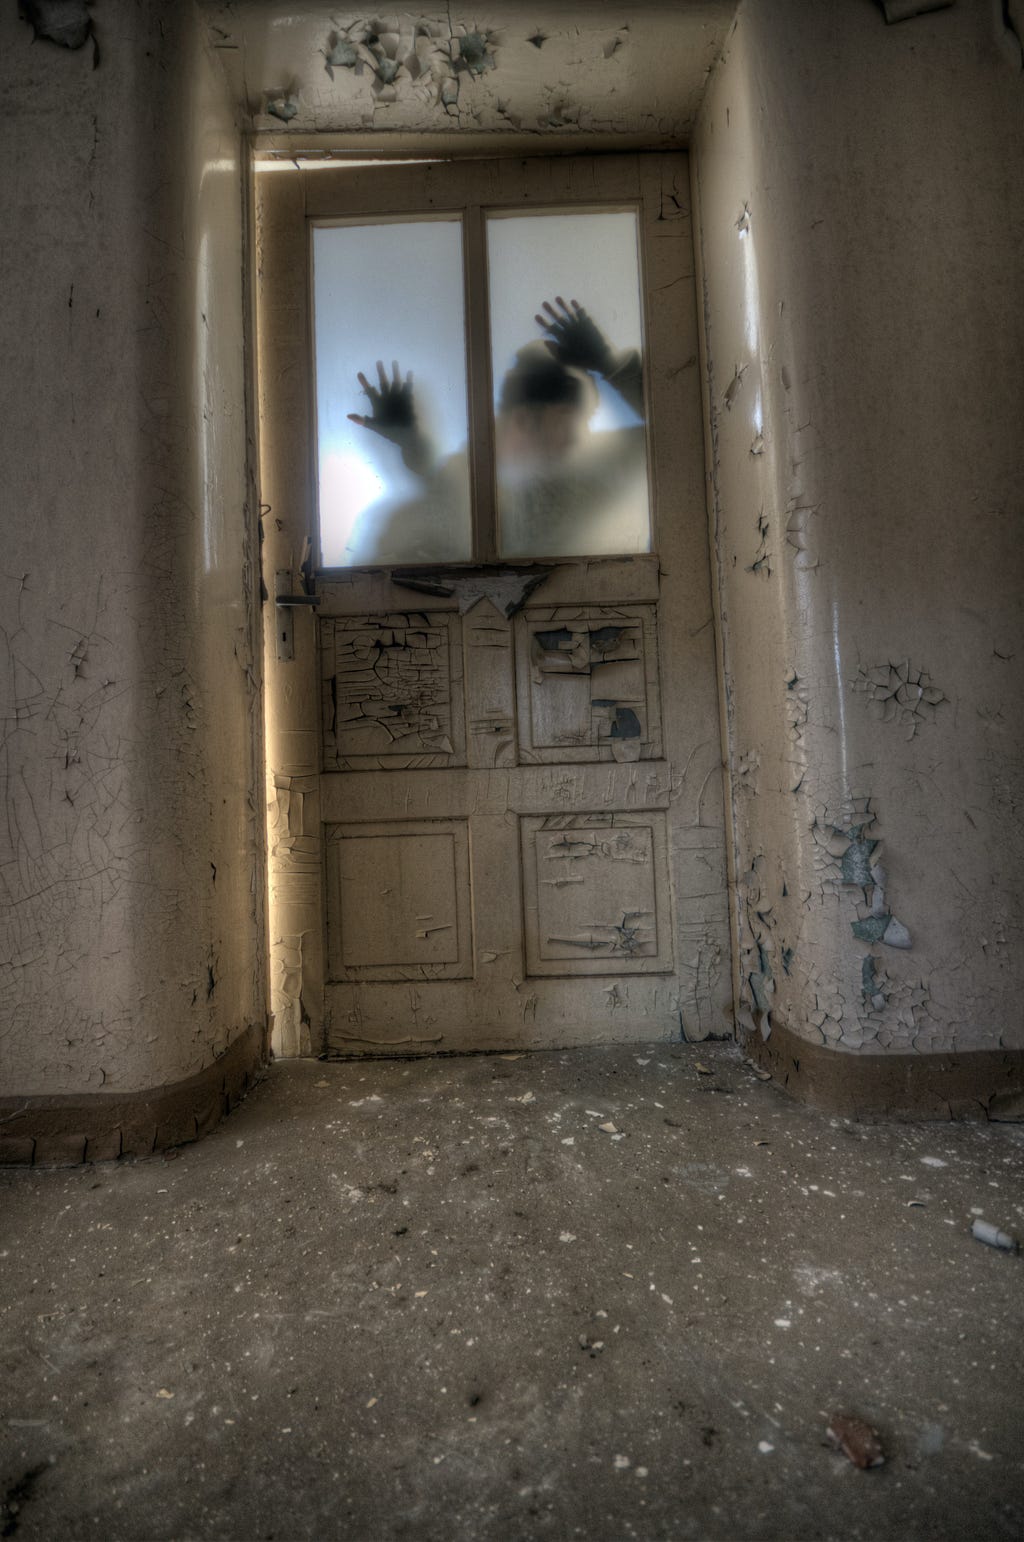 A photo that looks like zombies coming in through a door